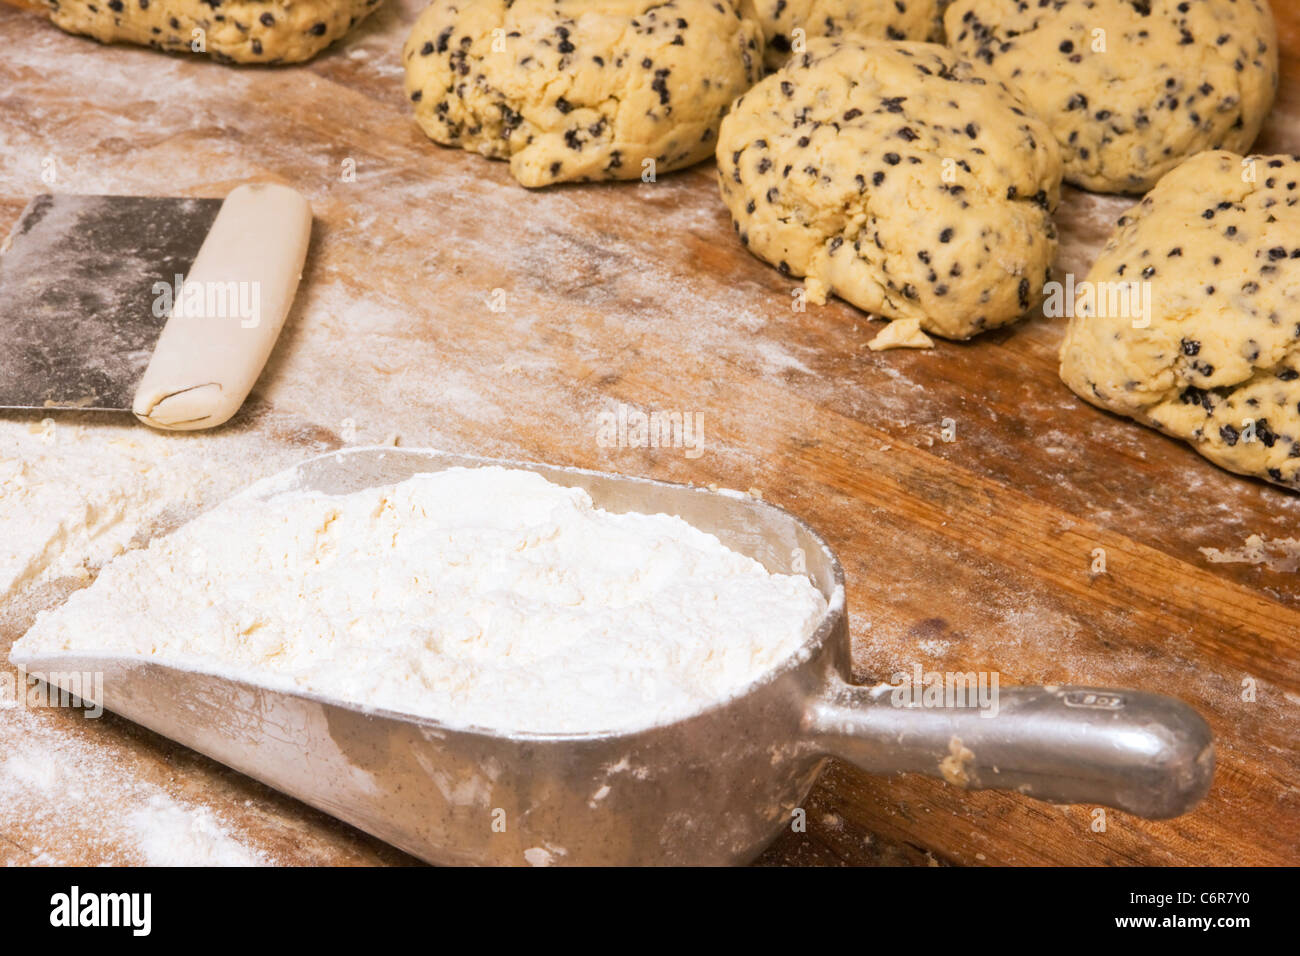 flour and rising balls of scone dough, D'Angelo Pastry and Bread, Santa Barbara, California, United States of America Stock Photo